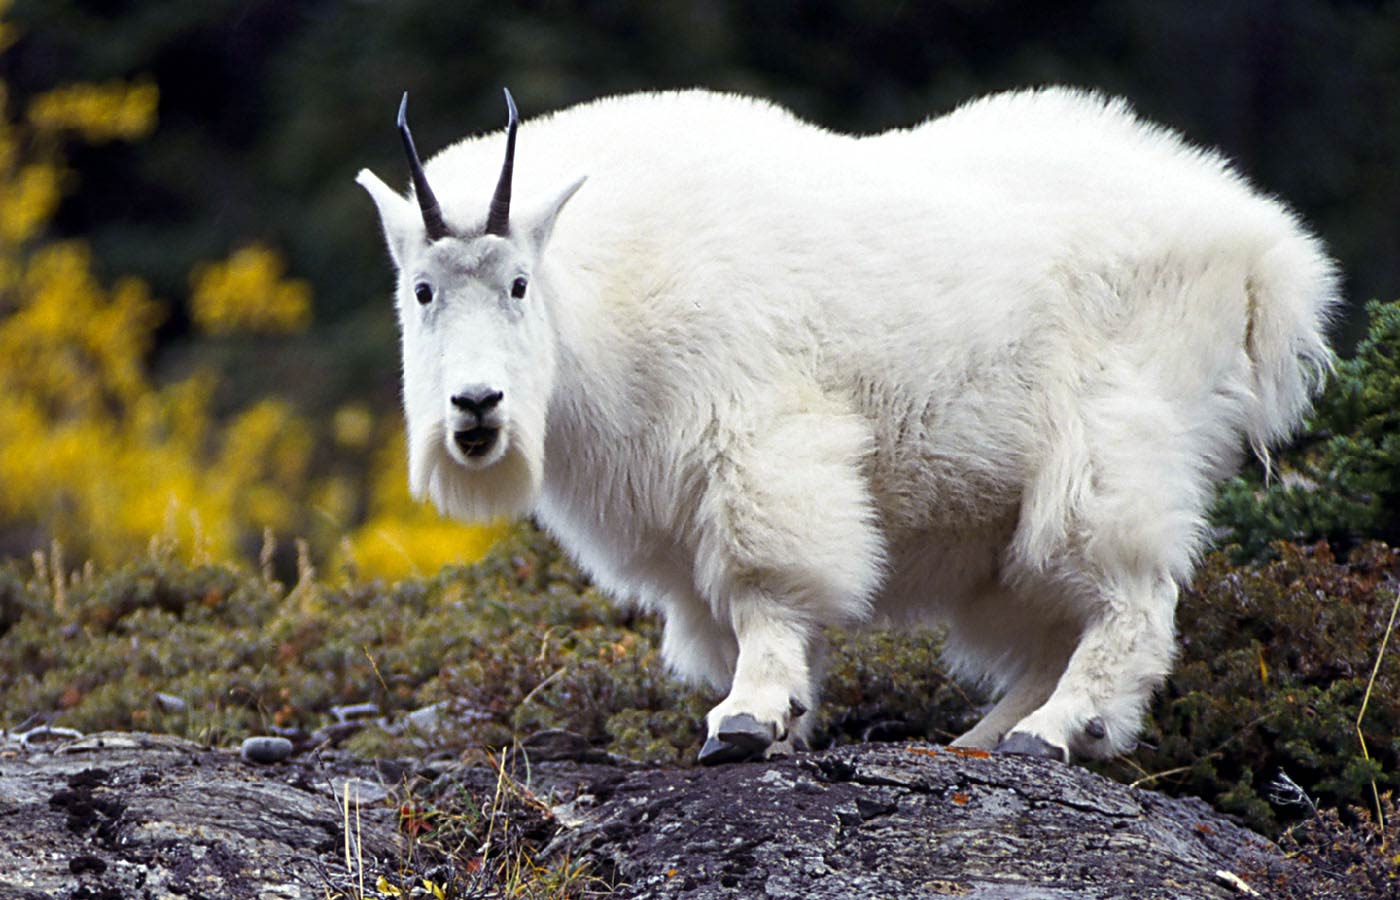 Goat Wallpapers and backgrounds